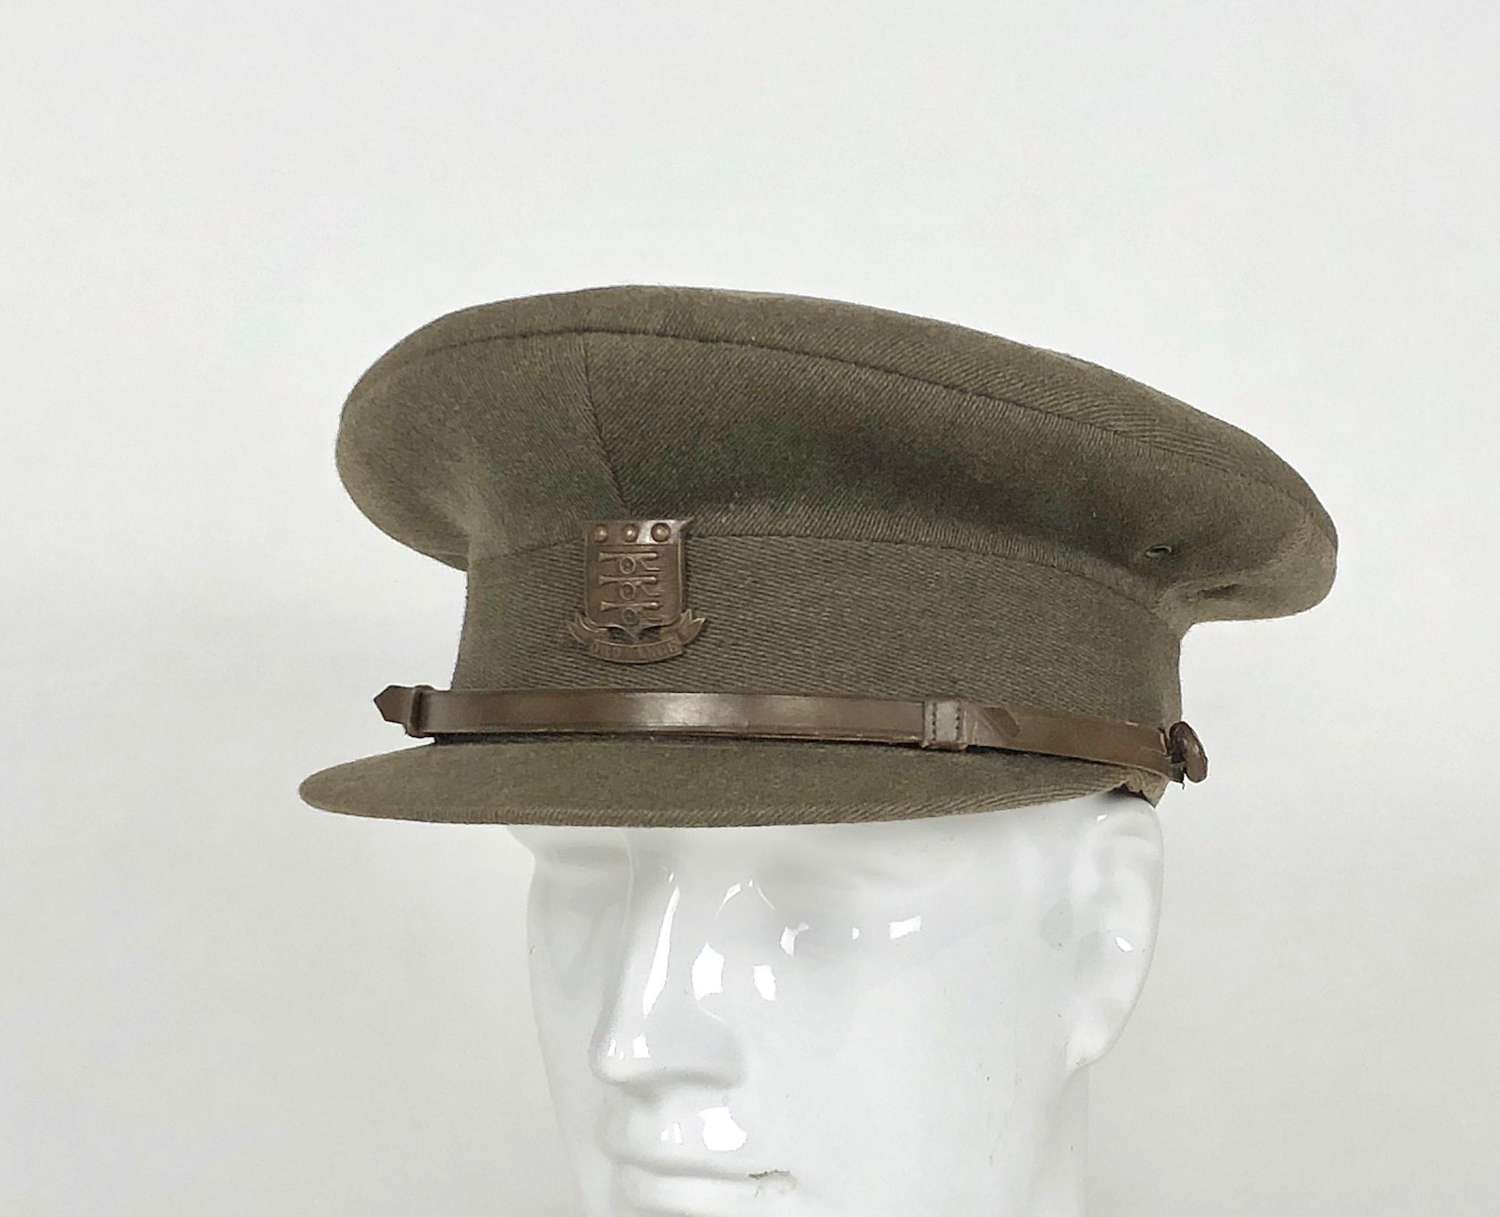 WW1 Army Ordinance Corps Officer’s Soft Cap.